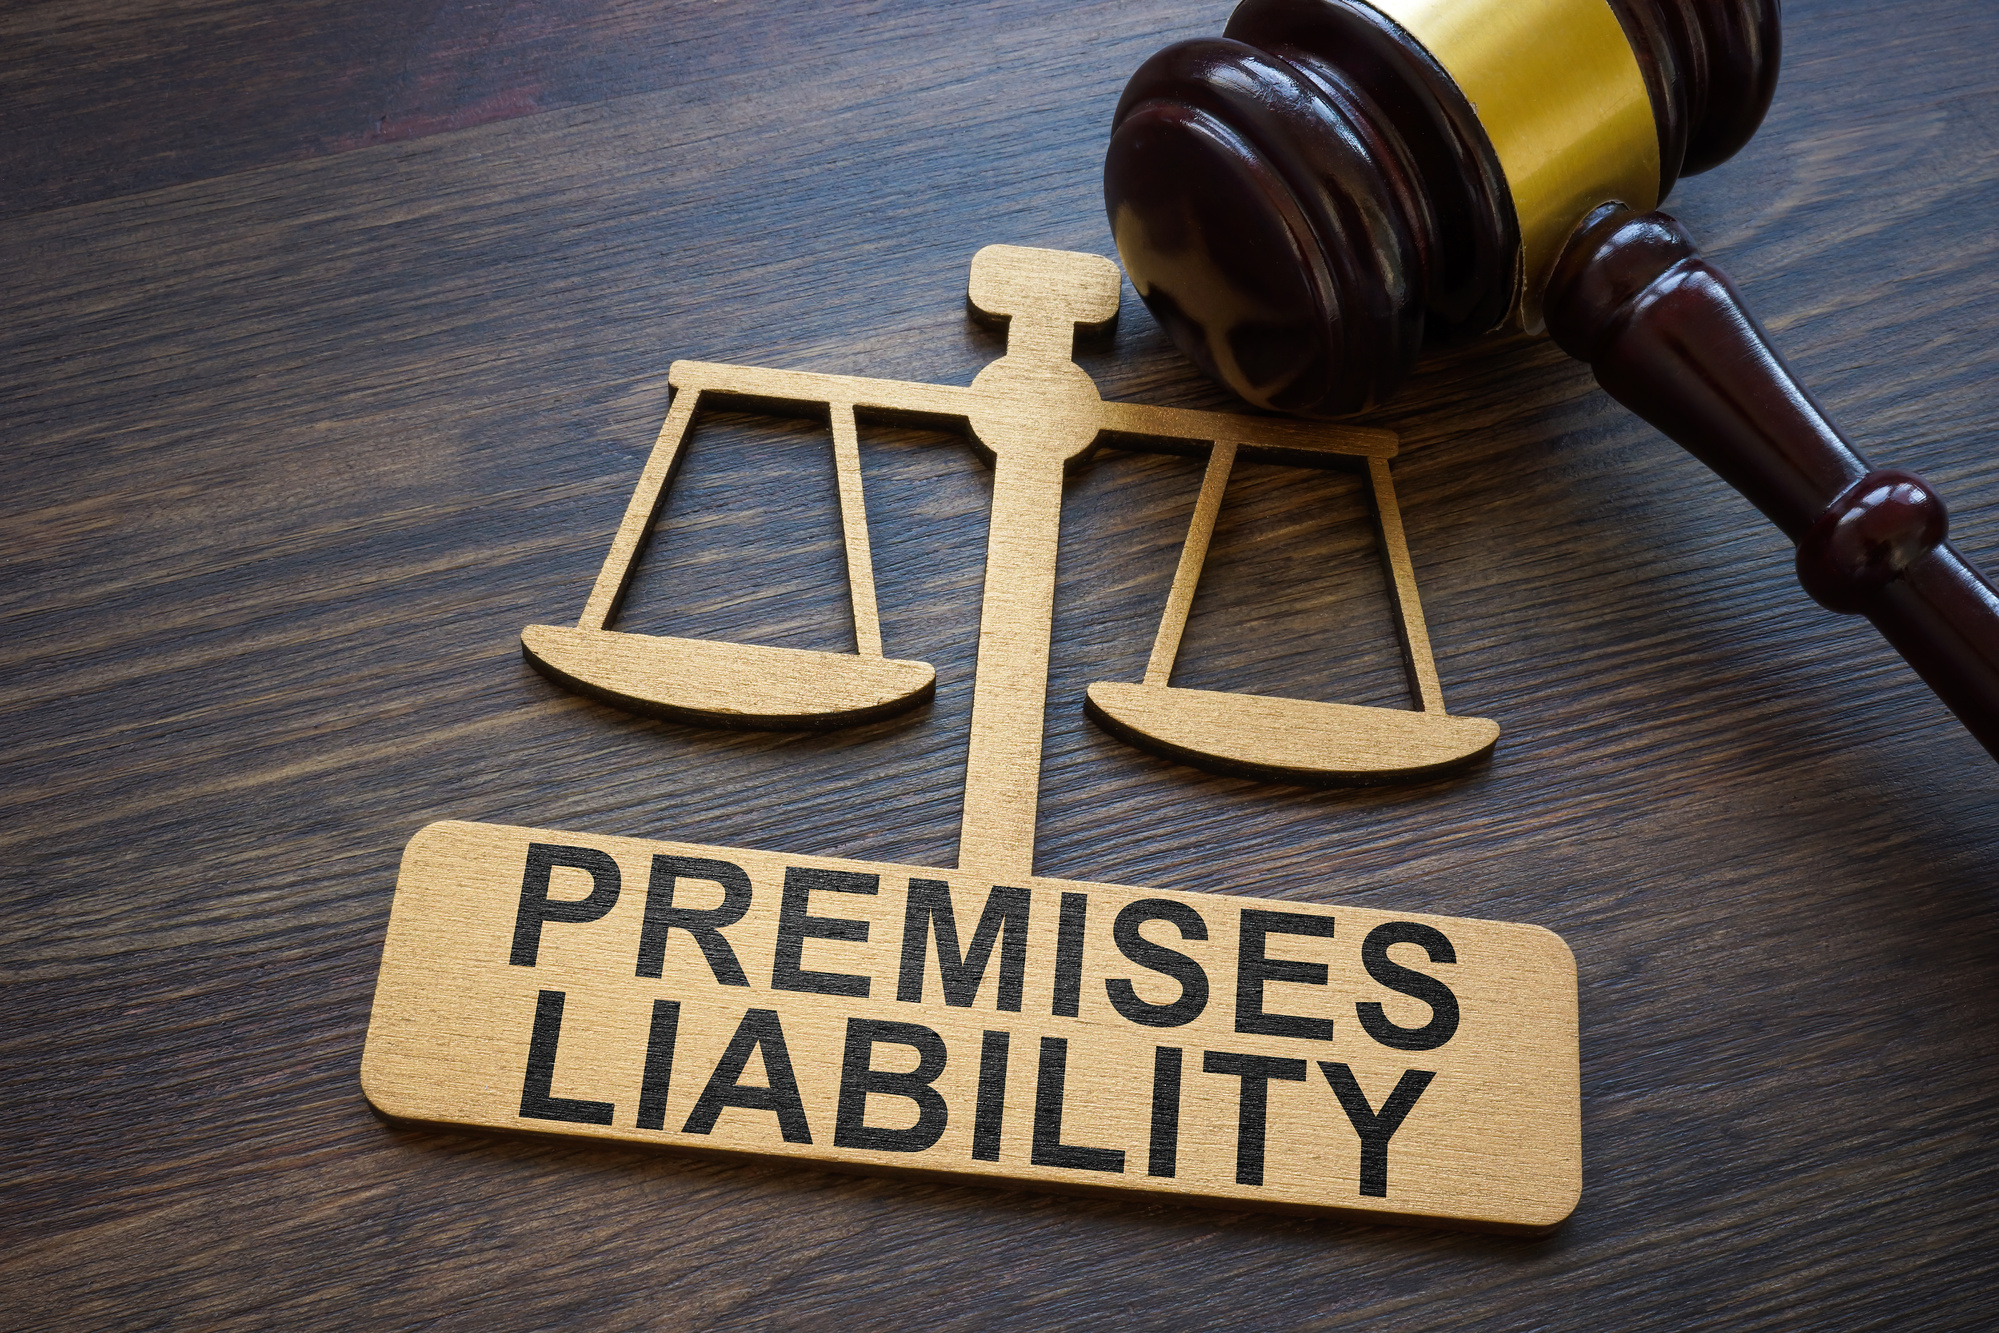 When Is The Best Time To Consult A Premises Liability Lawyer?